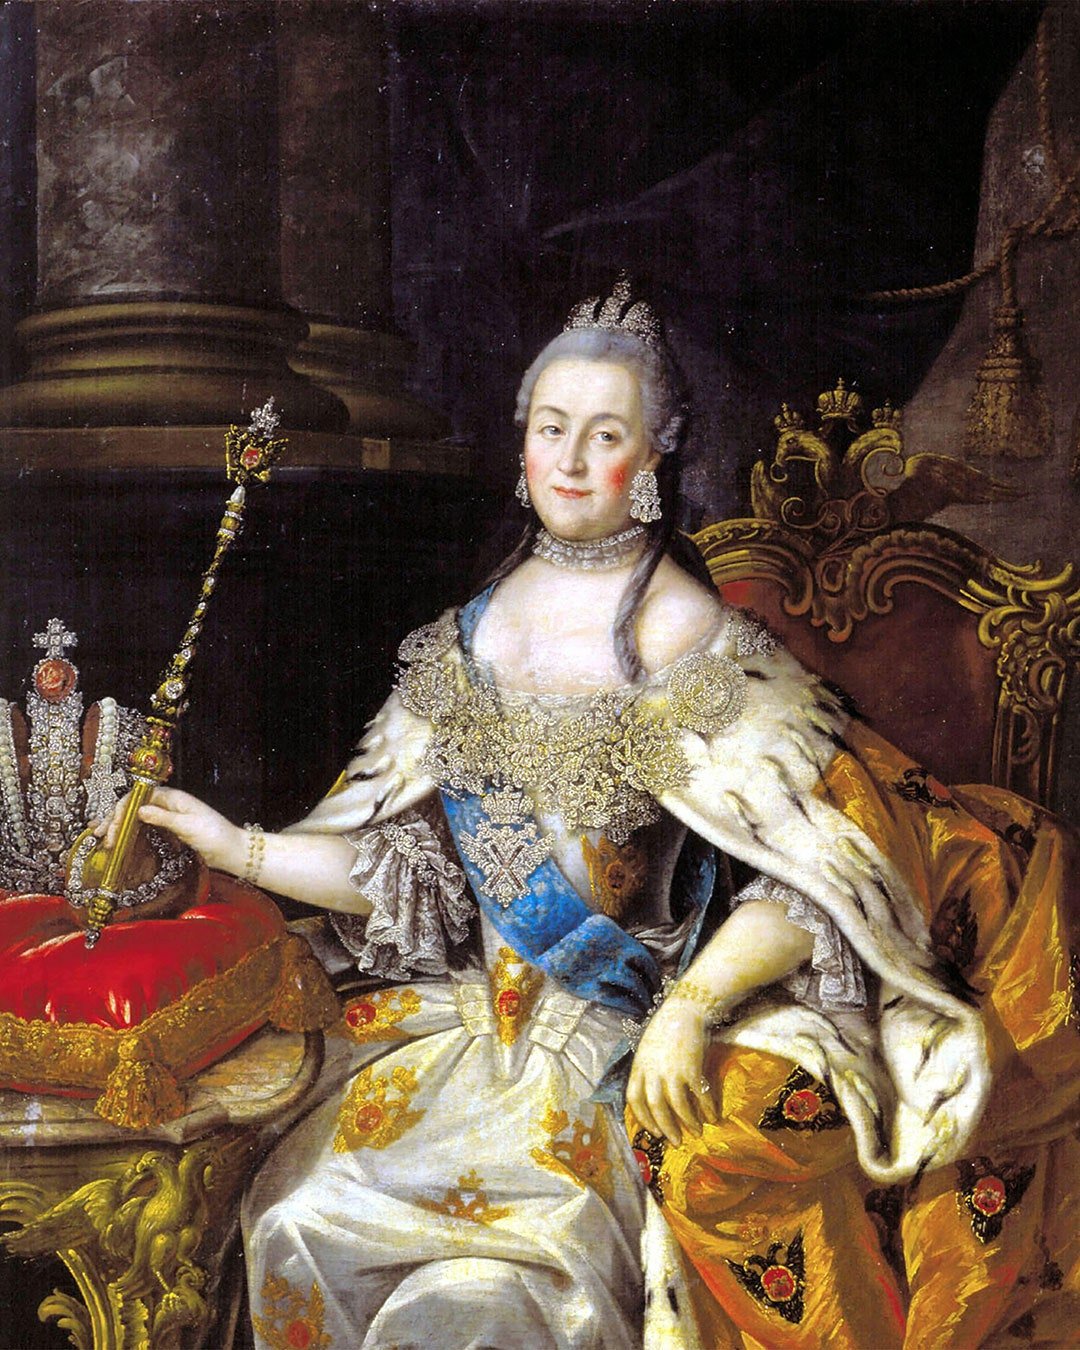 I couldn't find an image of Darya so here is Catherine the Great